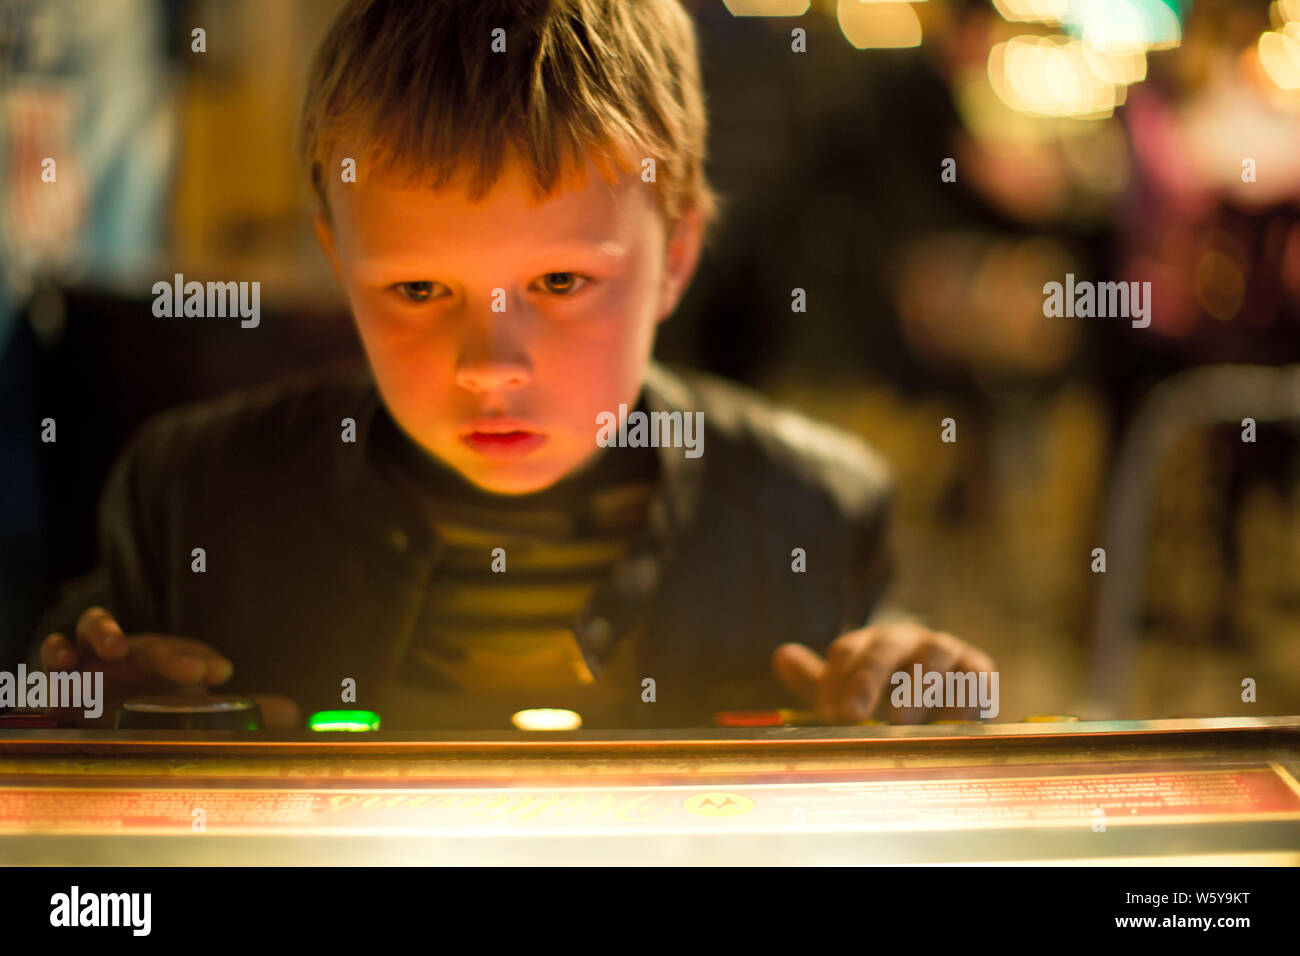 Young boy looking at an arcade game. Stock Photo